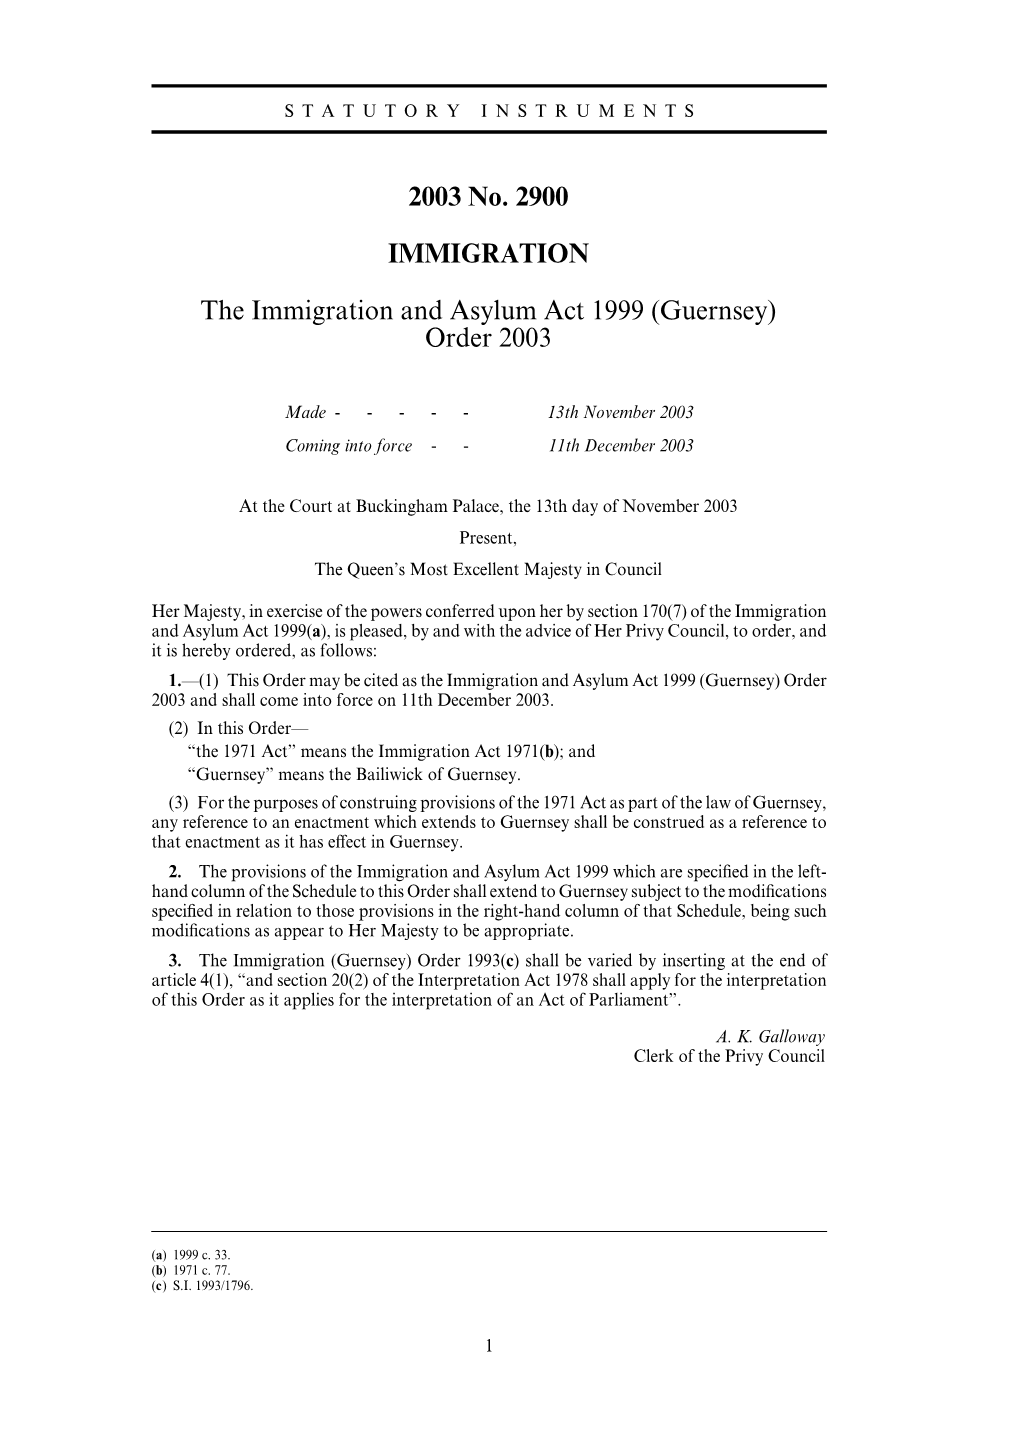 Immigration and Asylum Act 1999 (Guernsey) Order 2003